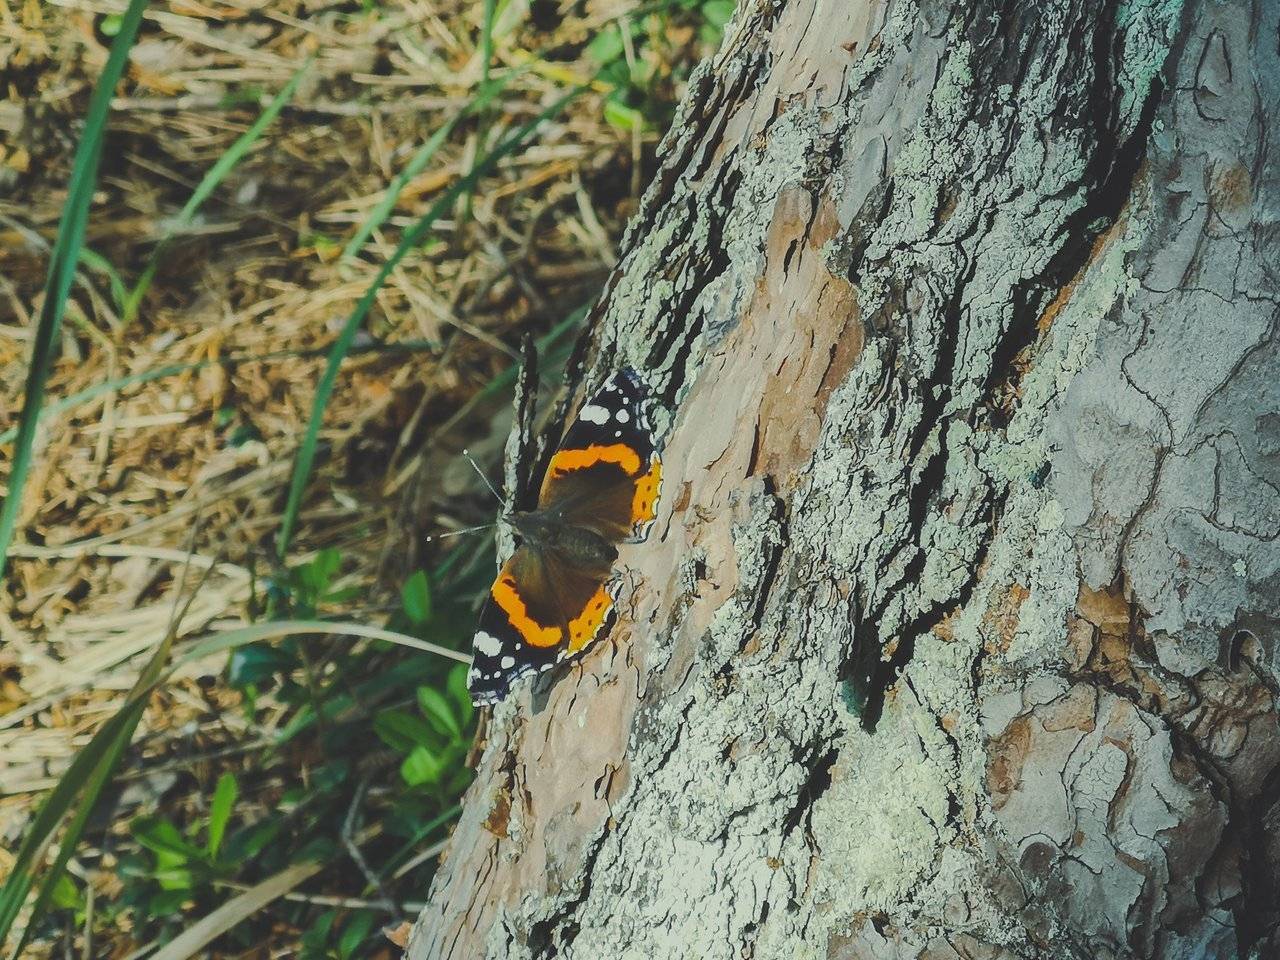   Red Admiral in Labanoras Regional Park, Lithuania. Photo Alis Monte [CC BY-SA 4.0], via Connecting the Dots